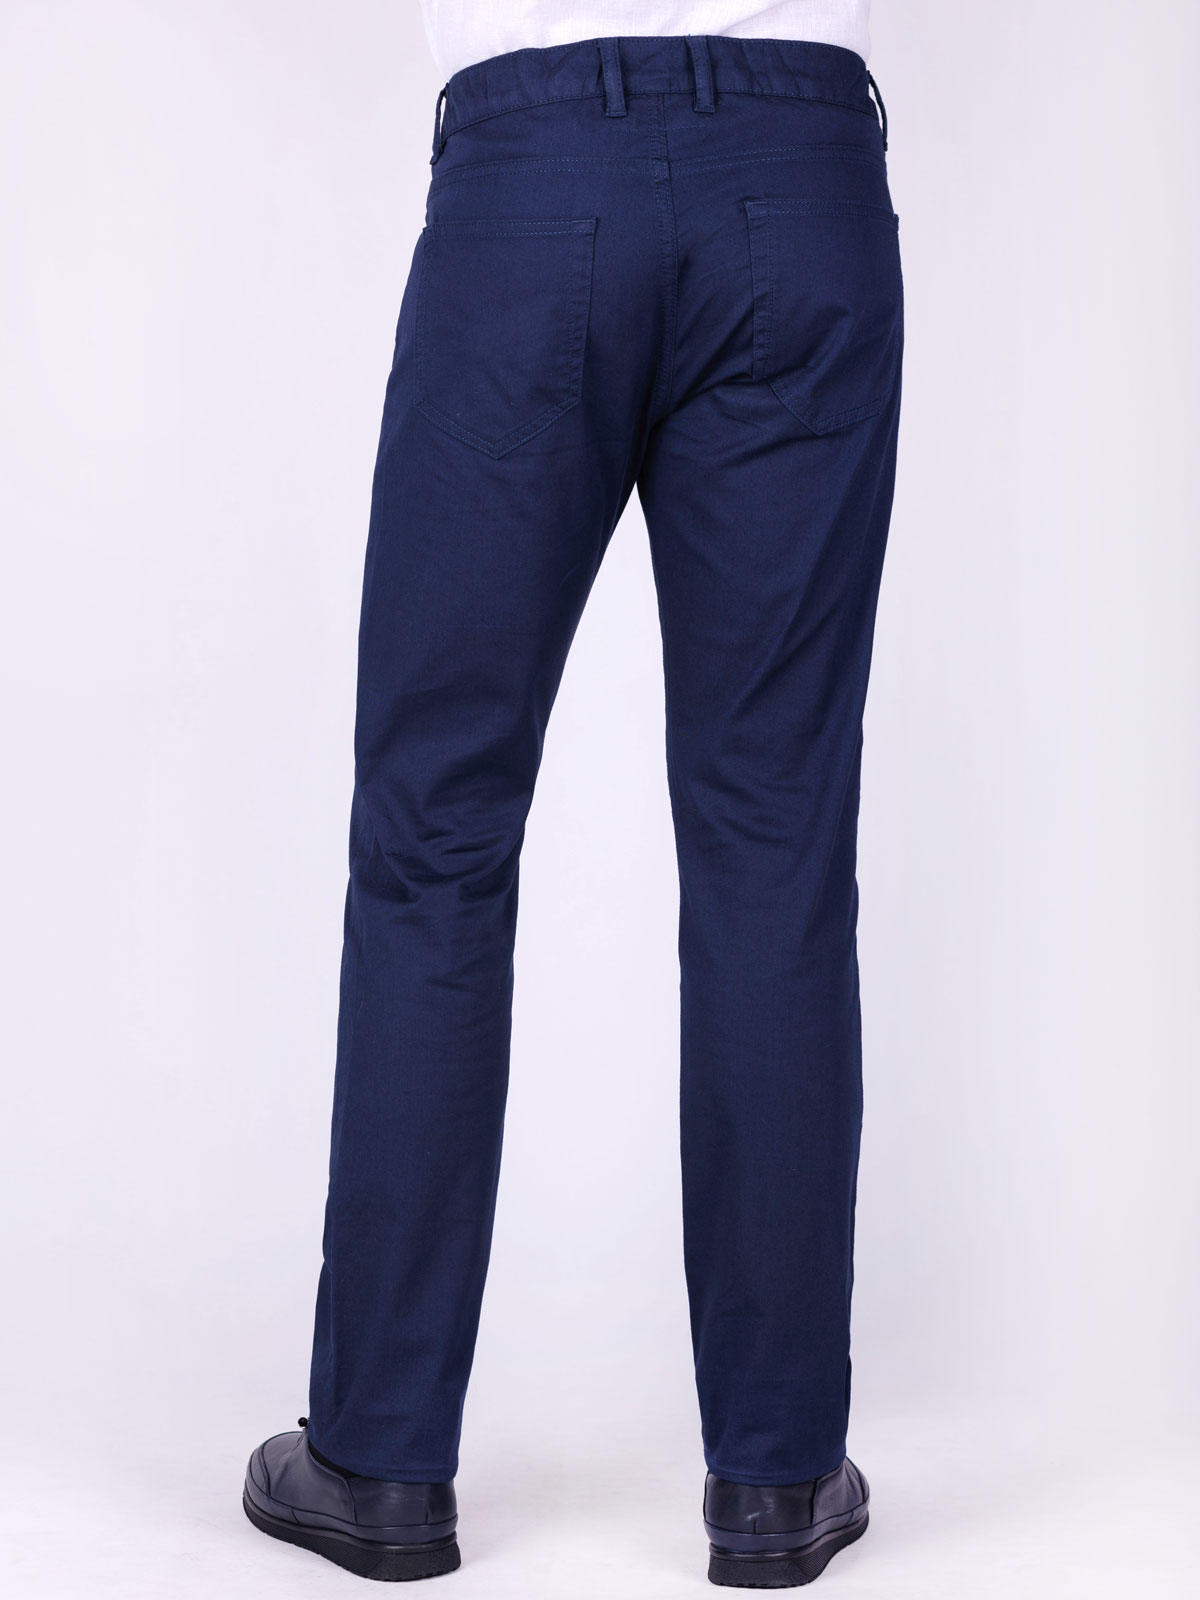 Navy five pocket trousers - 60301 € 66.37 img3